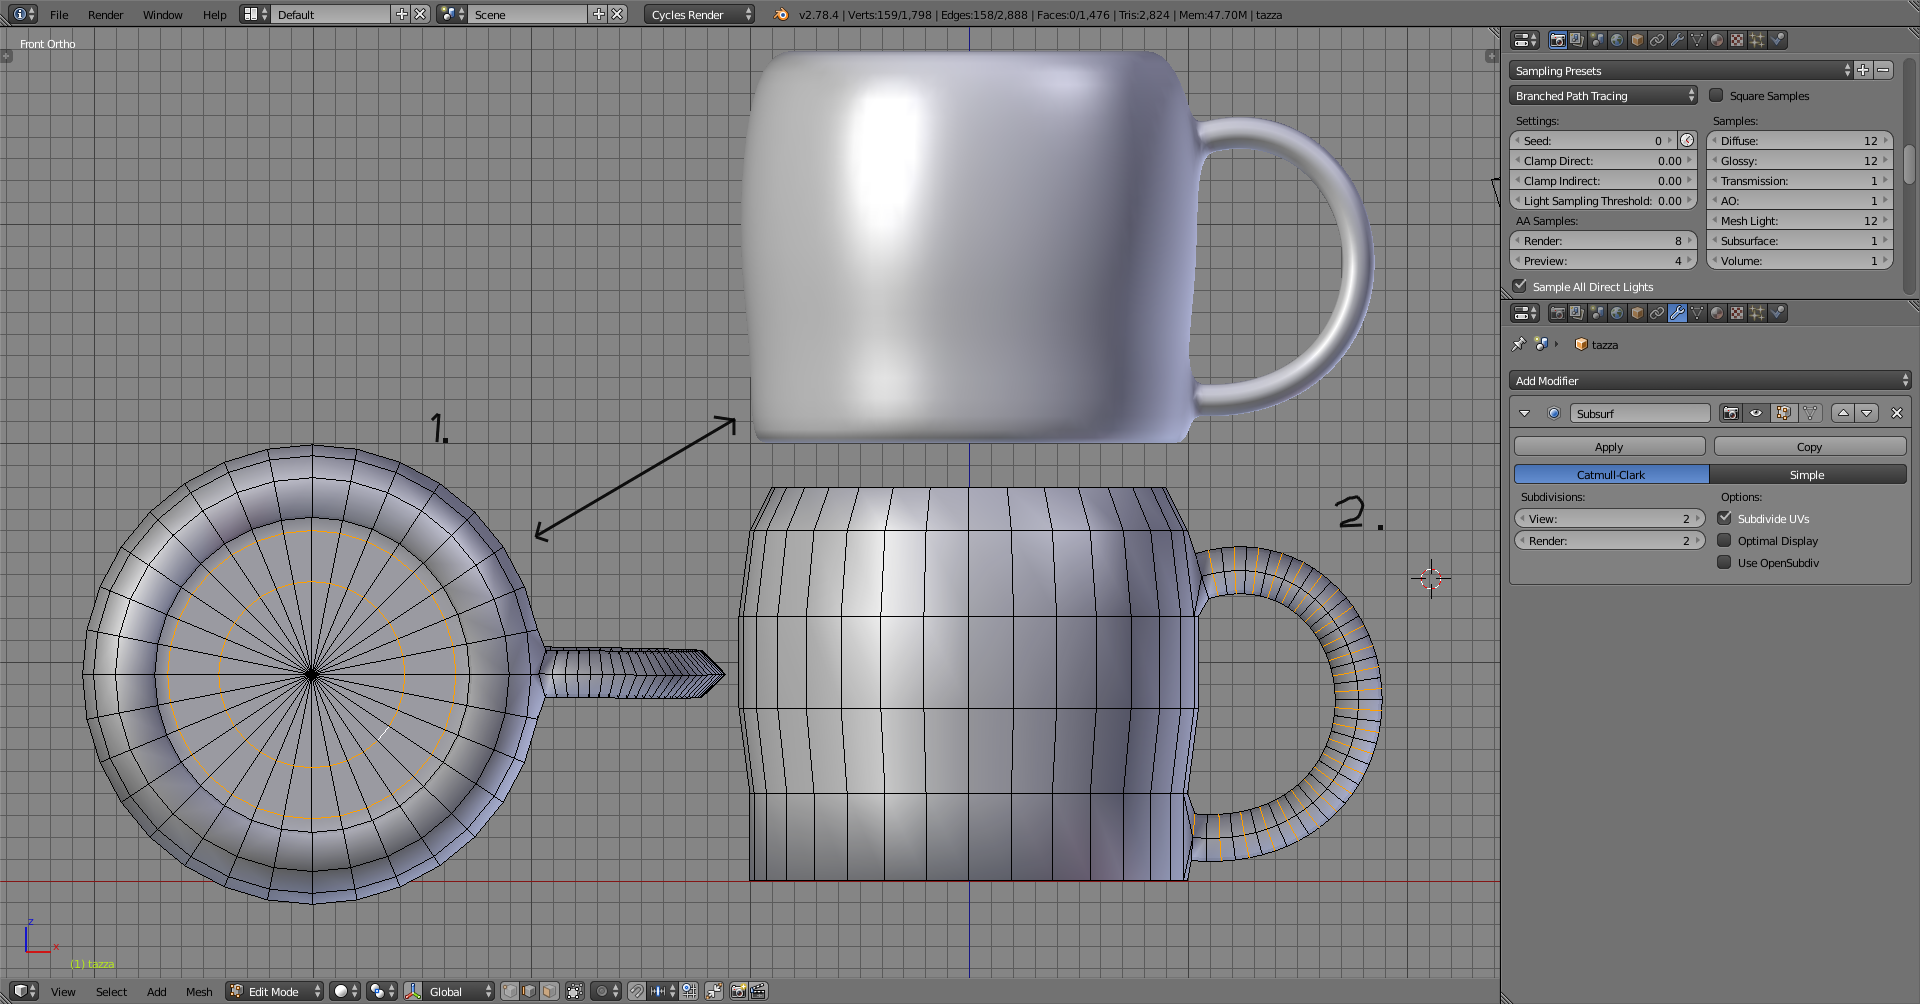 lesterbanks on X: How to Shatter a Mug in Blender With Rigid Body